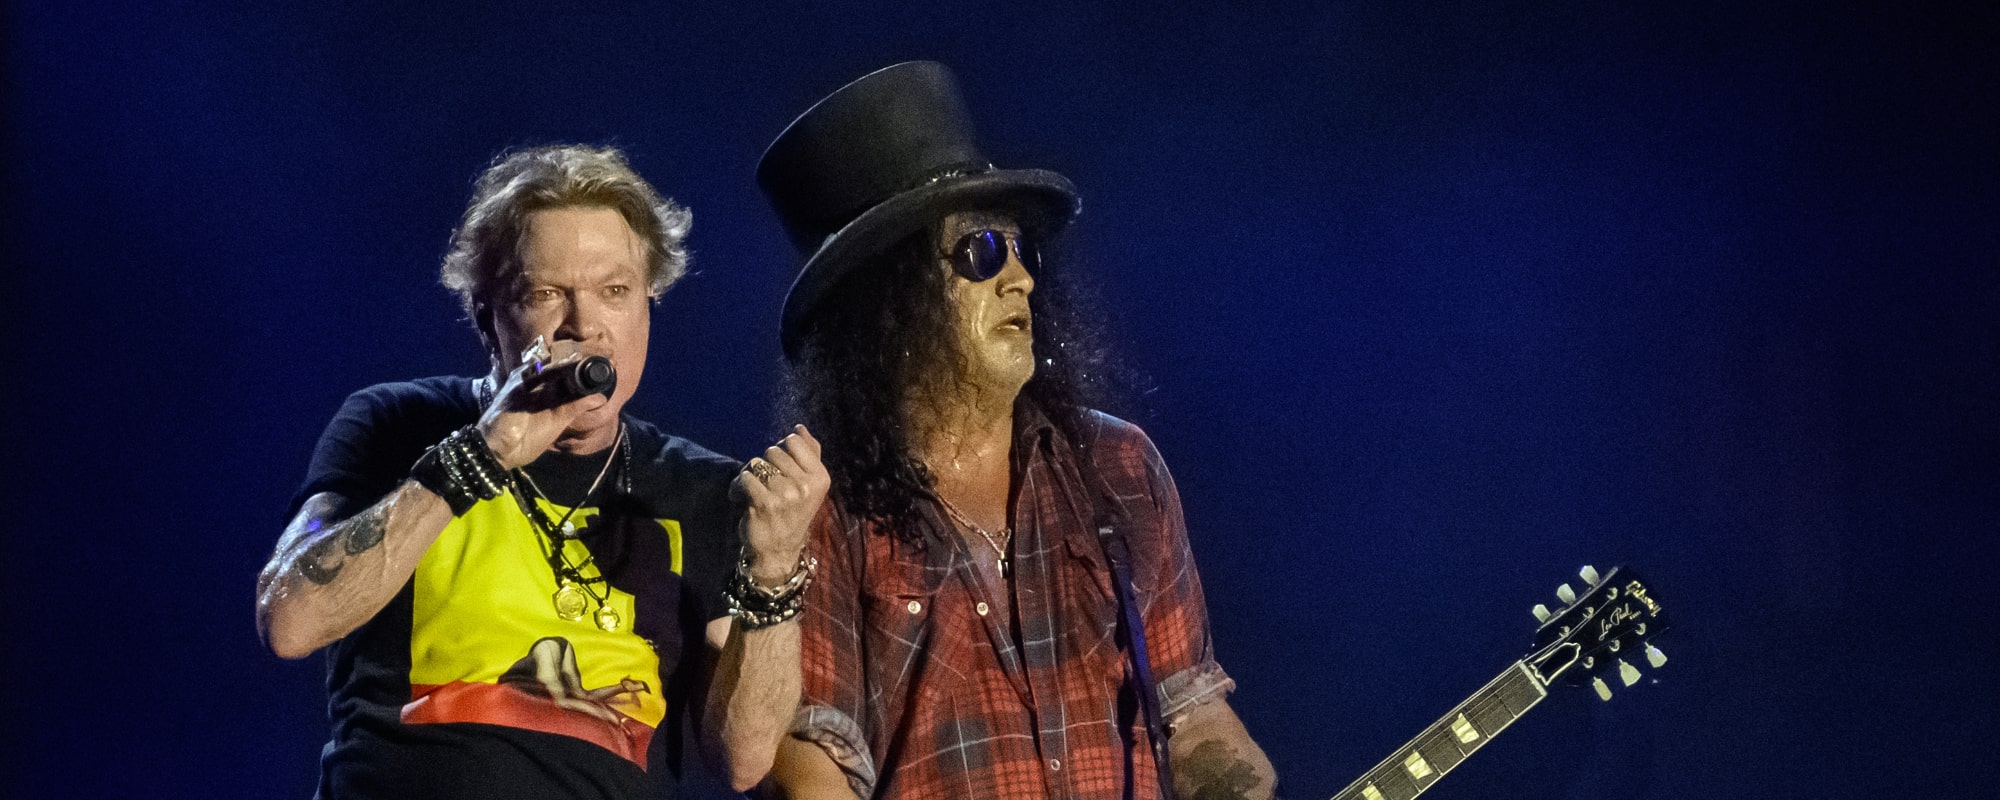 Guns N’ Roses Release Long-Awaited Track “The General” to Streaming Services